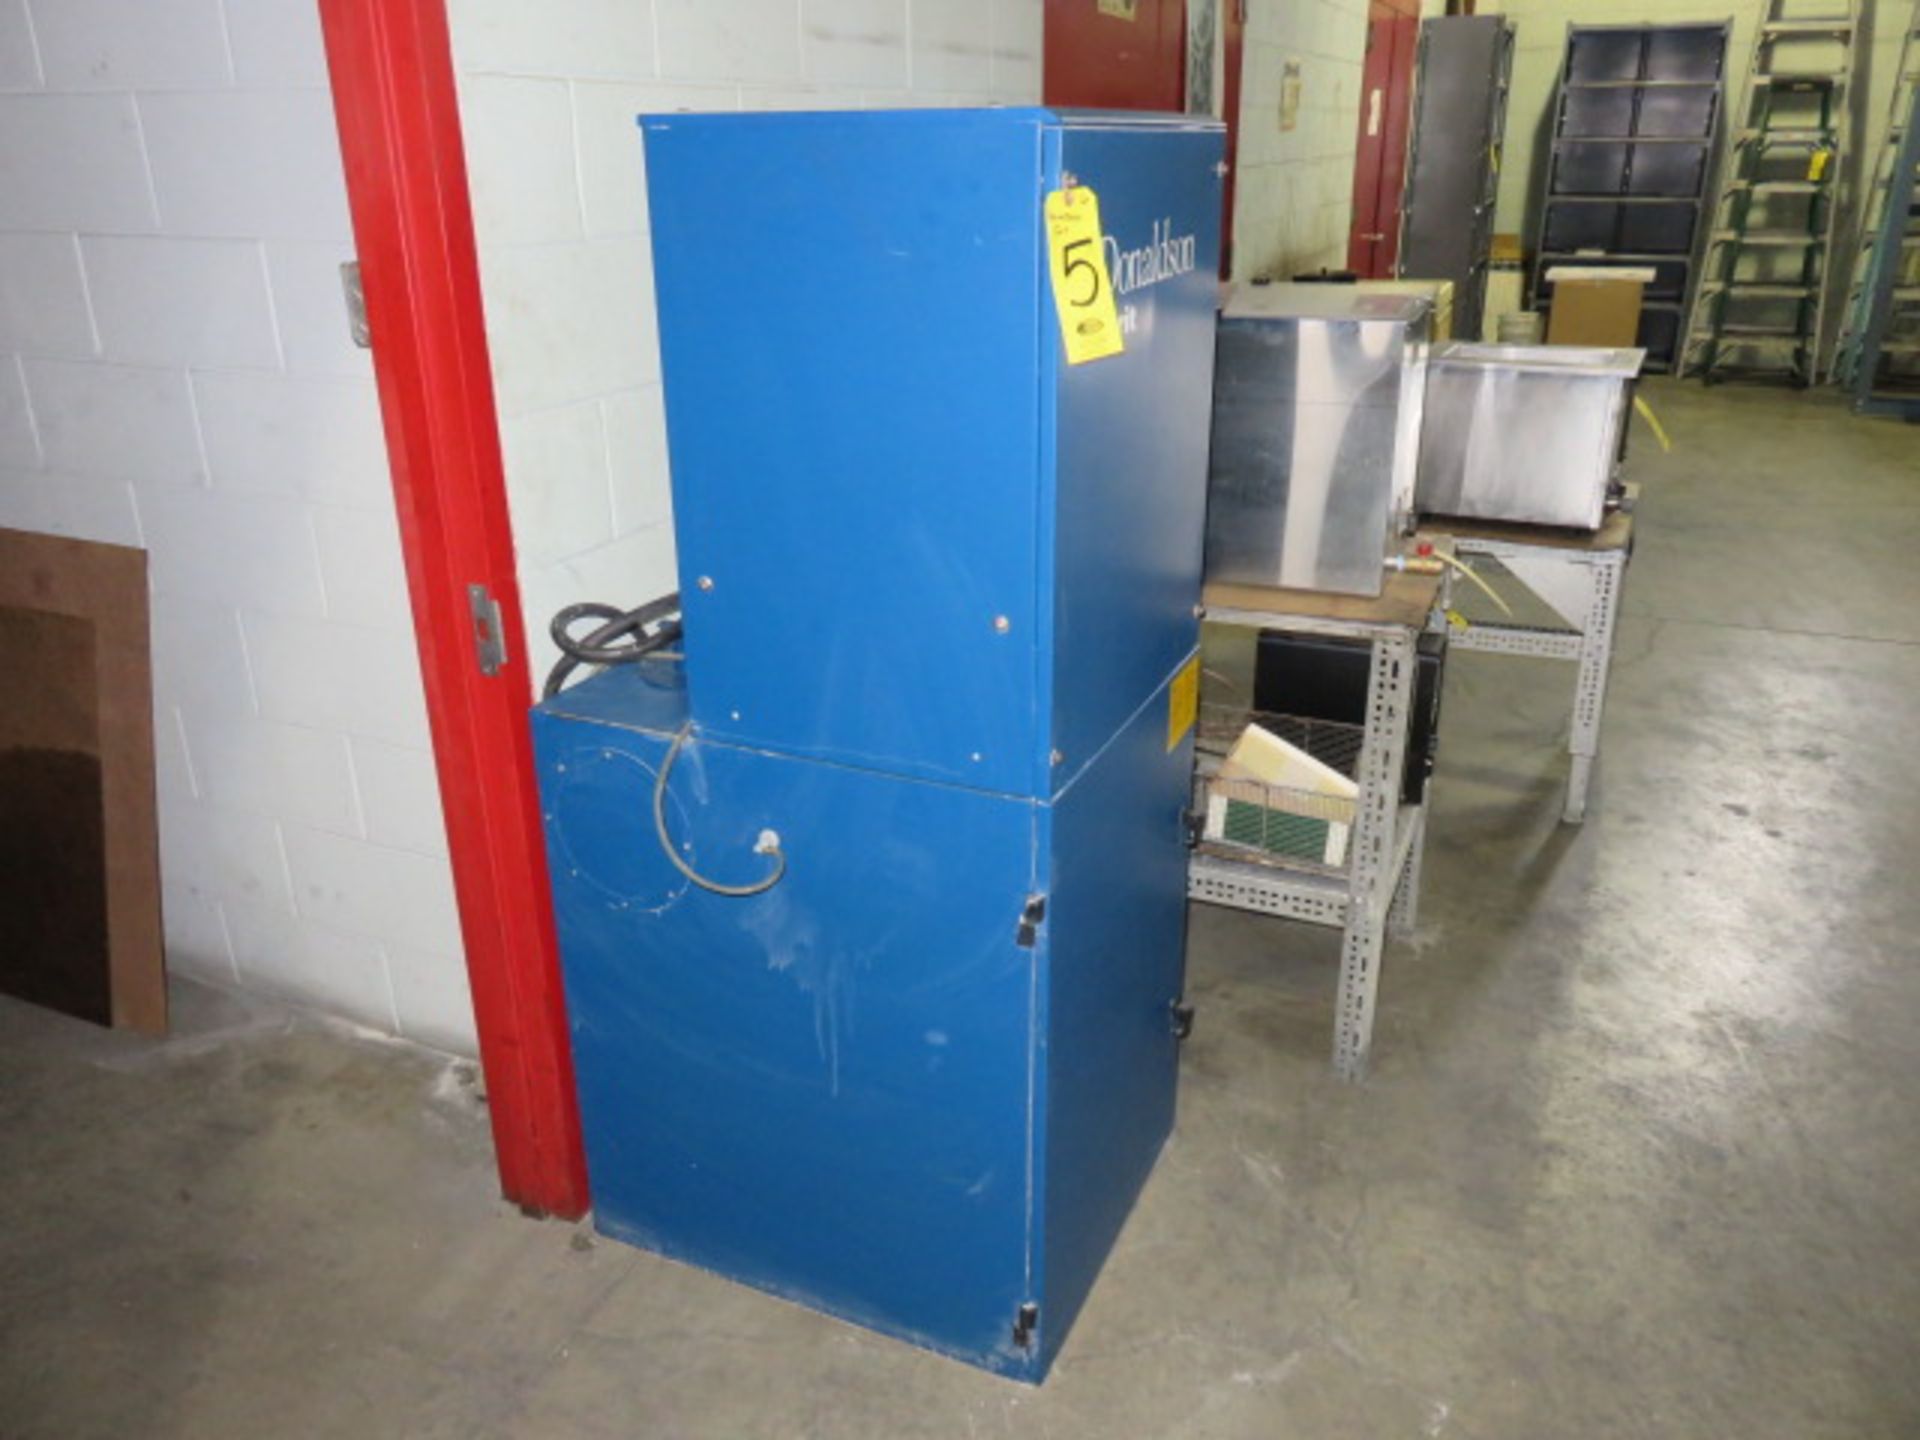 DONALDSON TORIT VS1200 CABINET DUST COLLECTOR - Image 2 of 2